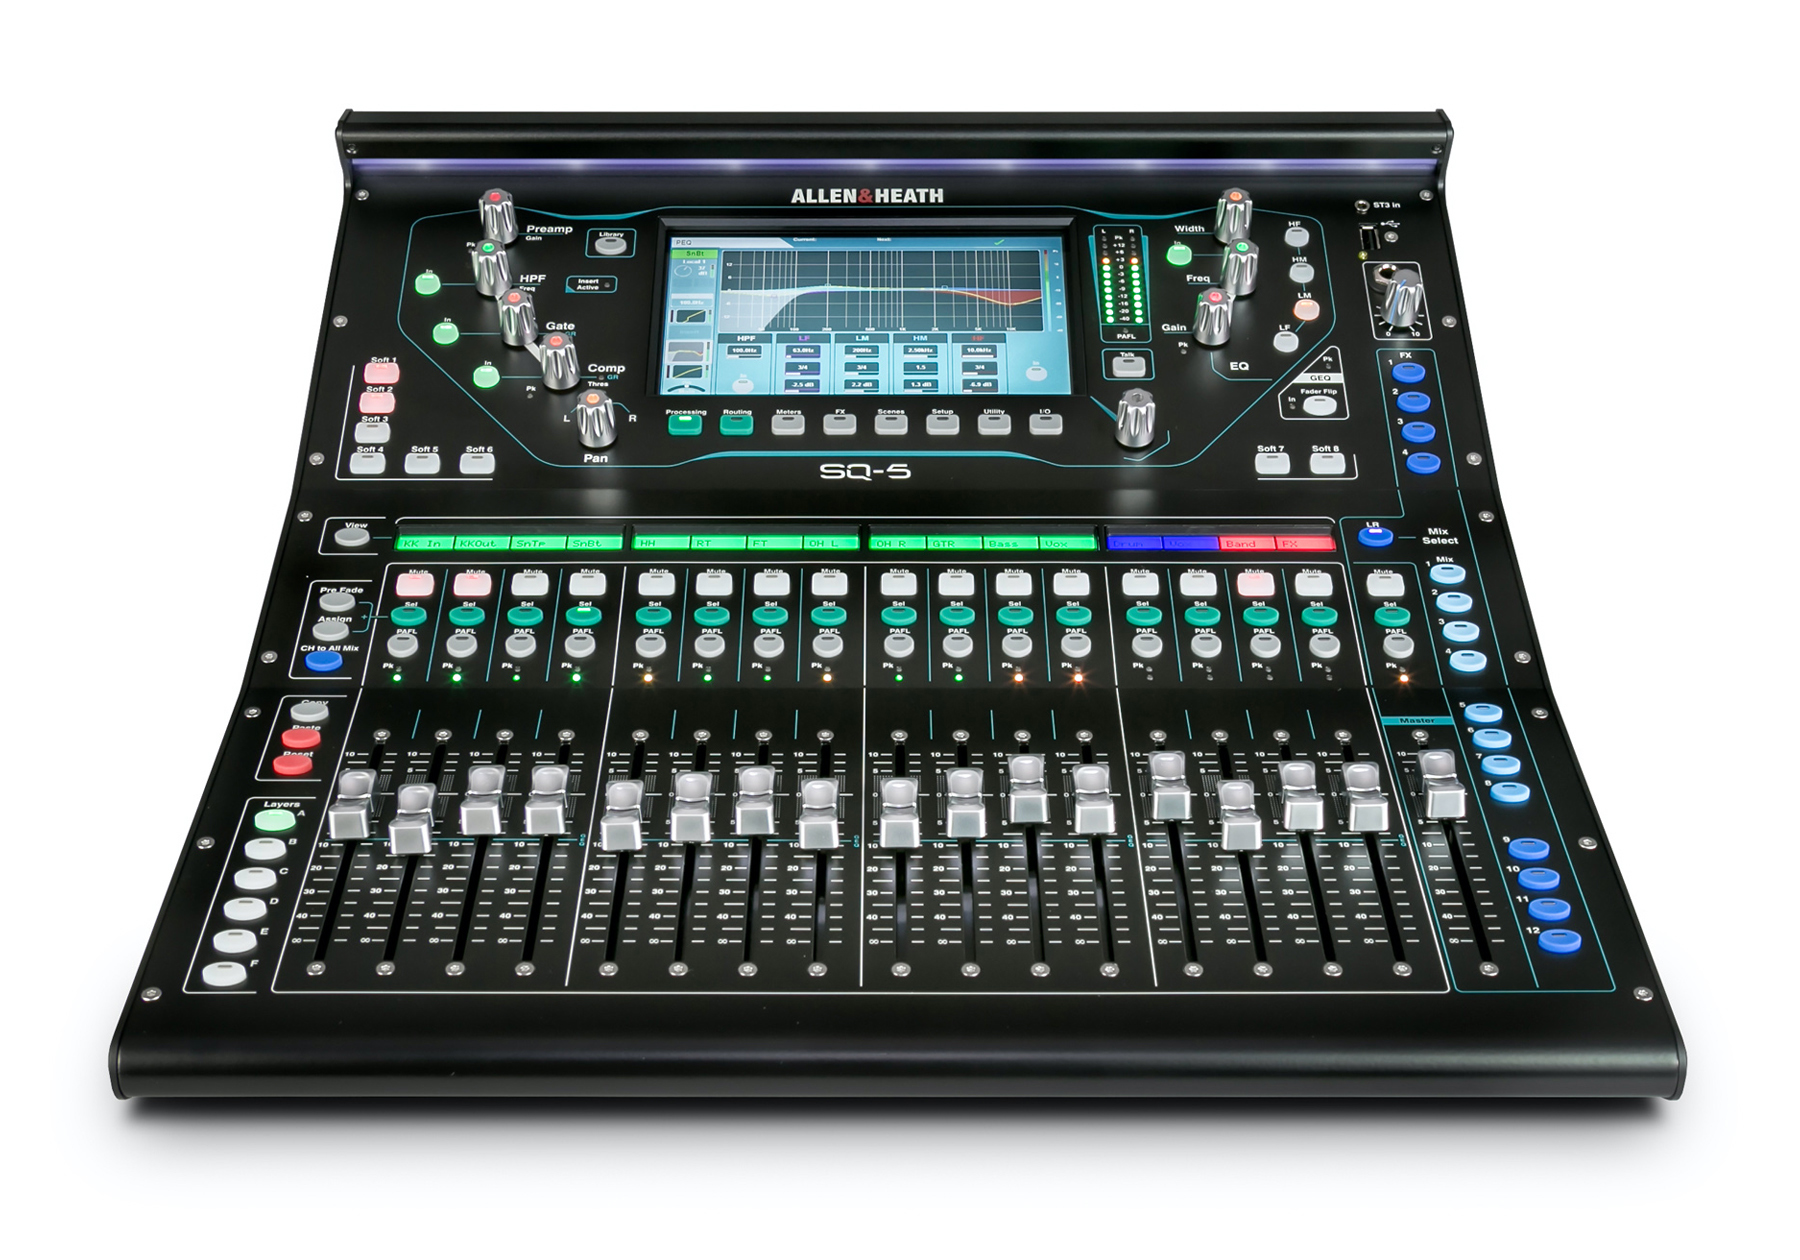 Hire Allen & Heath and Soundcraft digital & analogue mixing desk consoles in Carmarthenshire, Pembrokeshire, Ceredigion, Cardiff, Newport, Swansea, South & West Wales